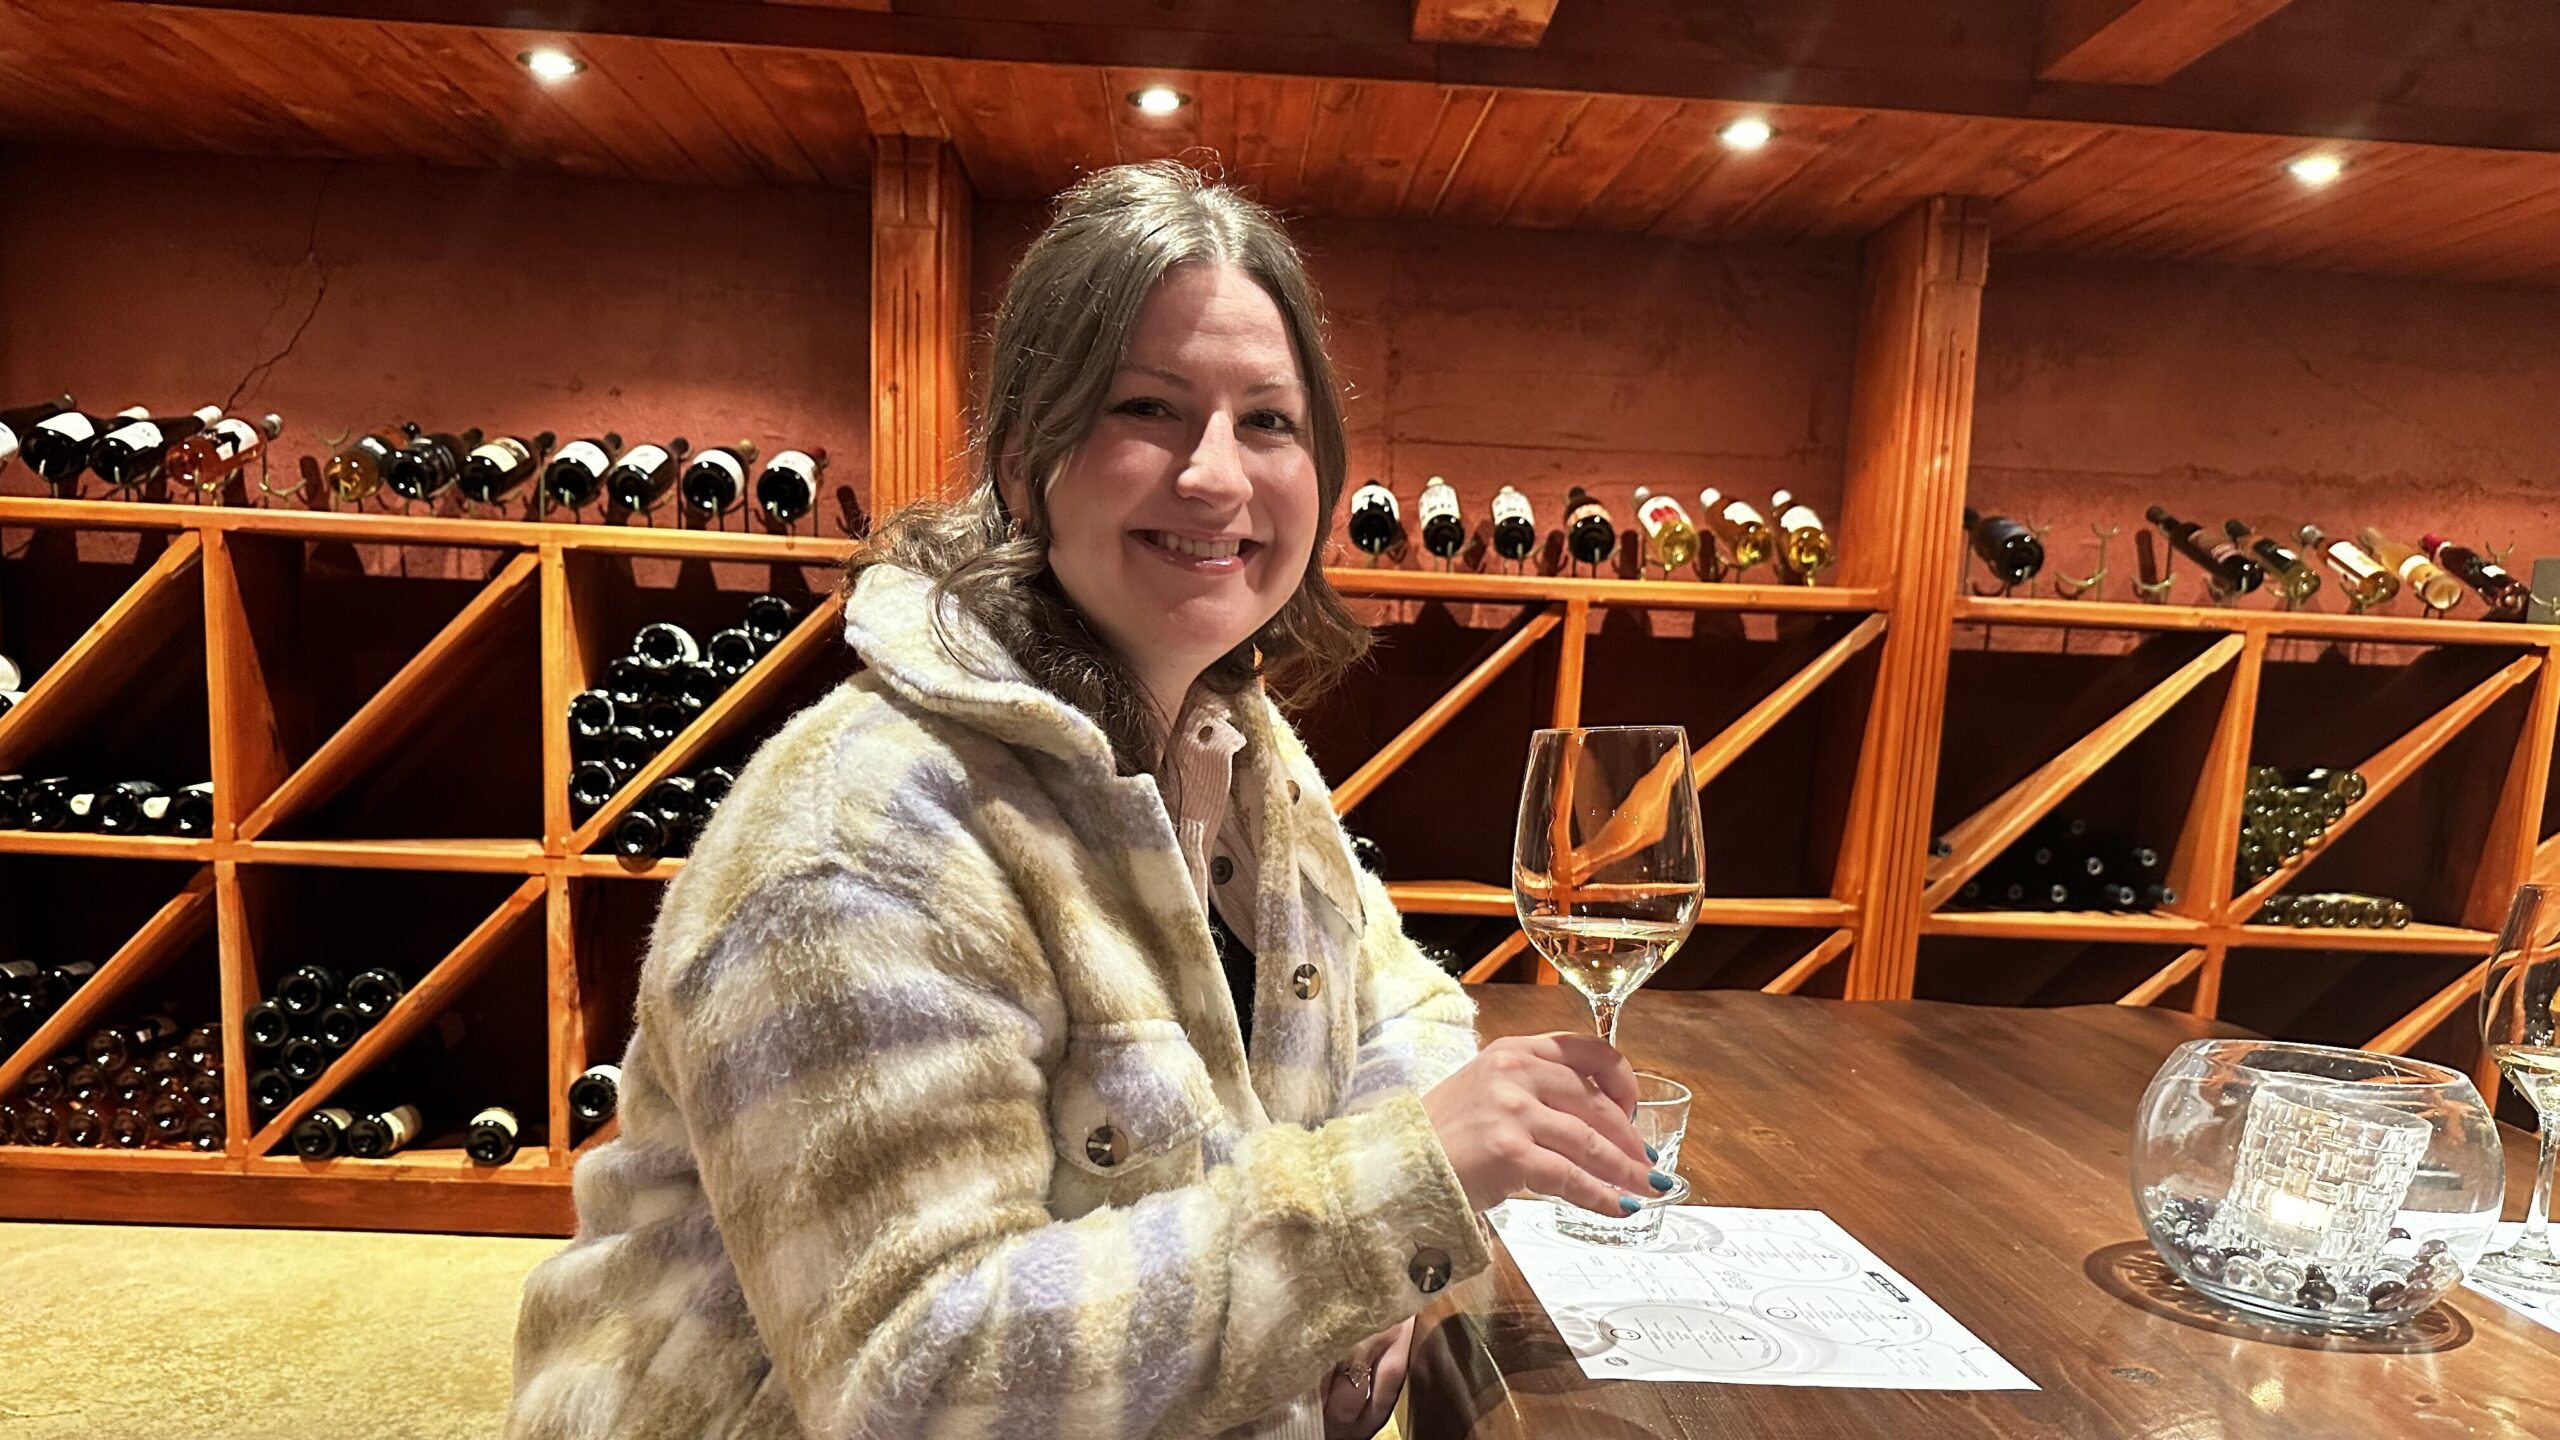 Bri Mitchell with wine glass in hand in the Wine Cellar at Elmhirst's Resort.